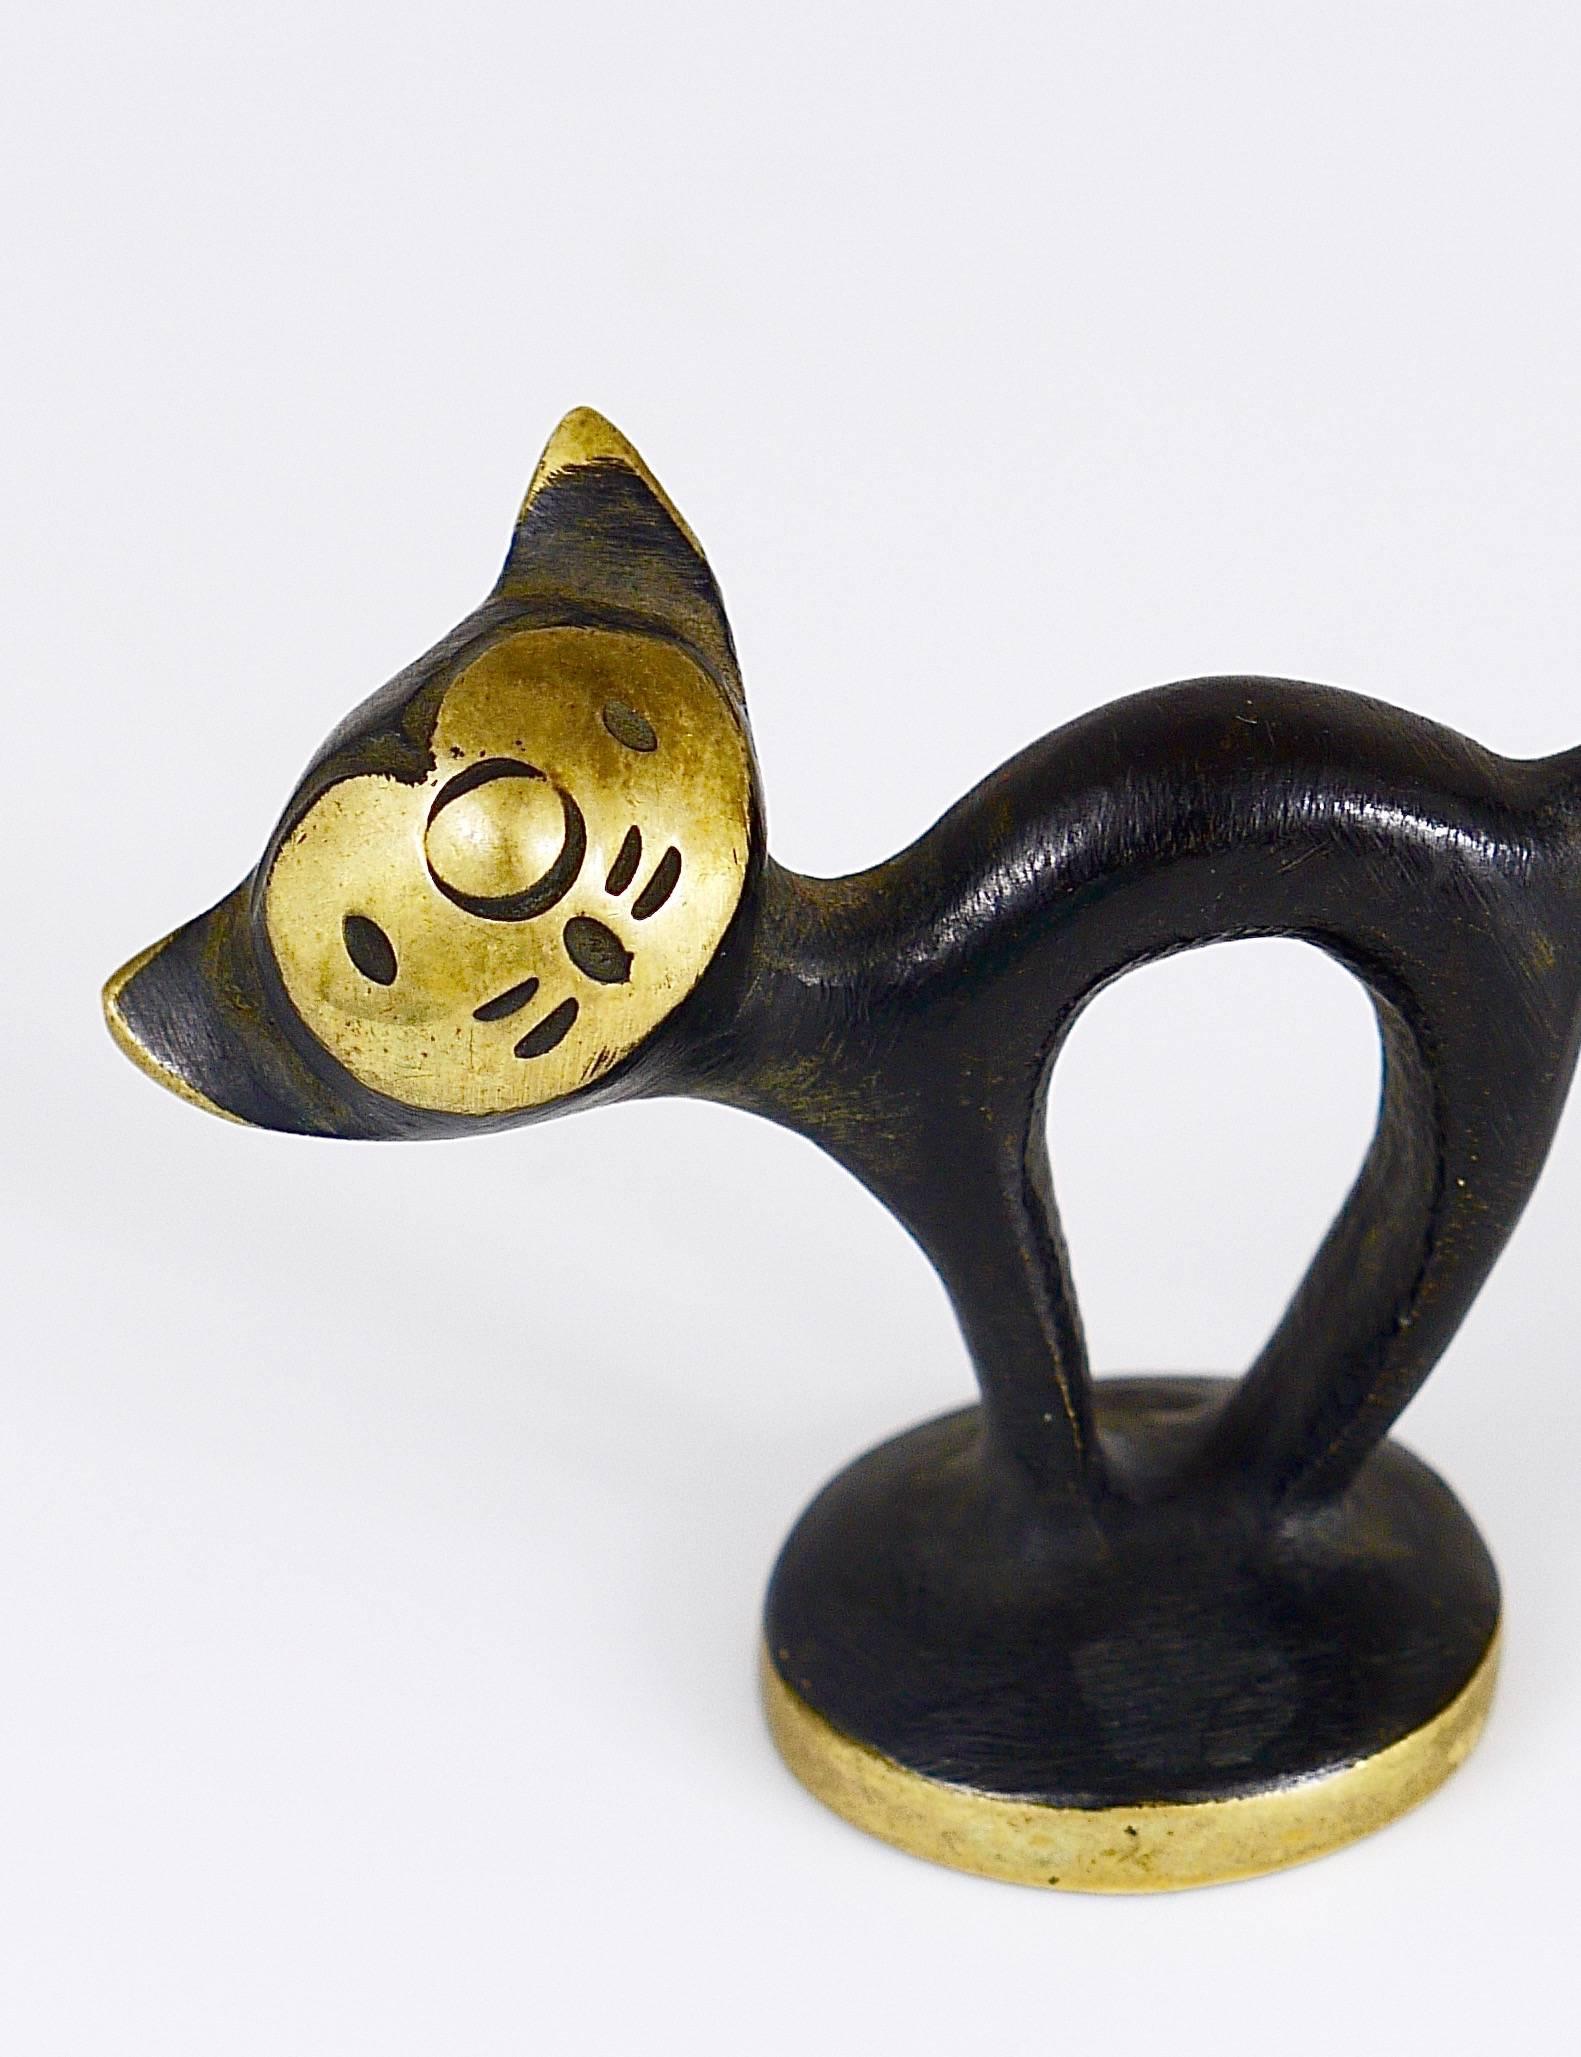 A very charming cat sculpture from the 1950s, made of brass. A very humorous design by Walter Bosse, executed by Hertha Baller Austria in the 1950s. In excellent condition. Marked.